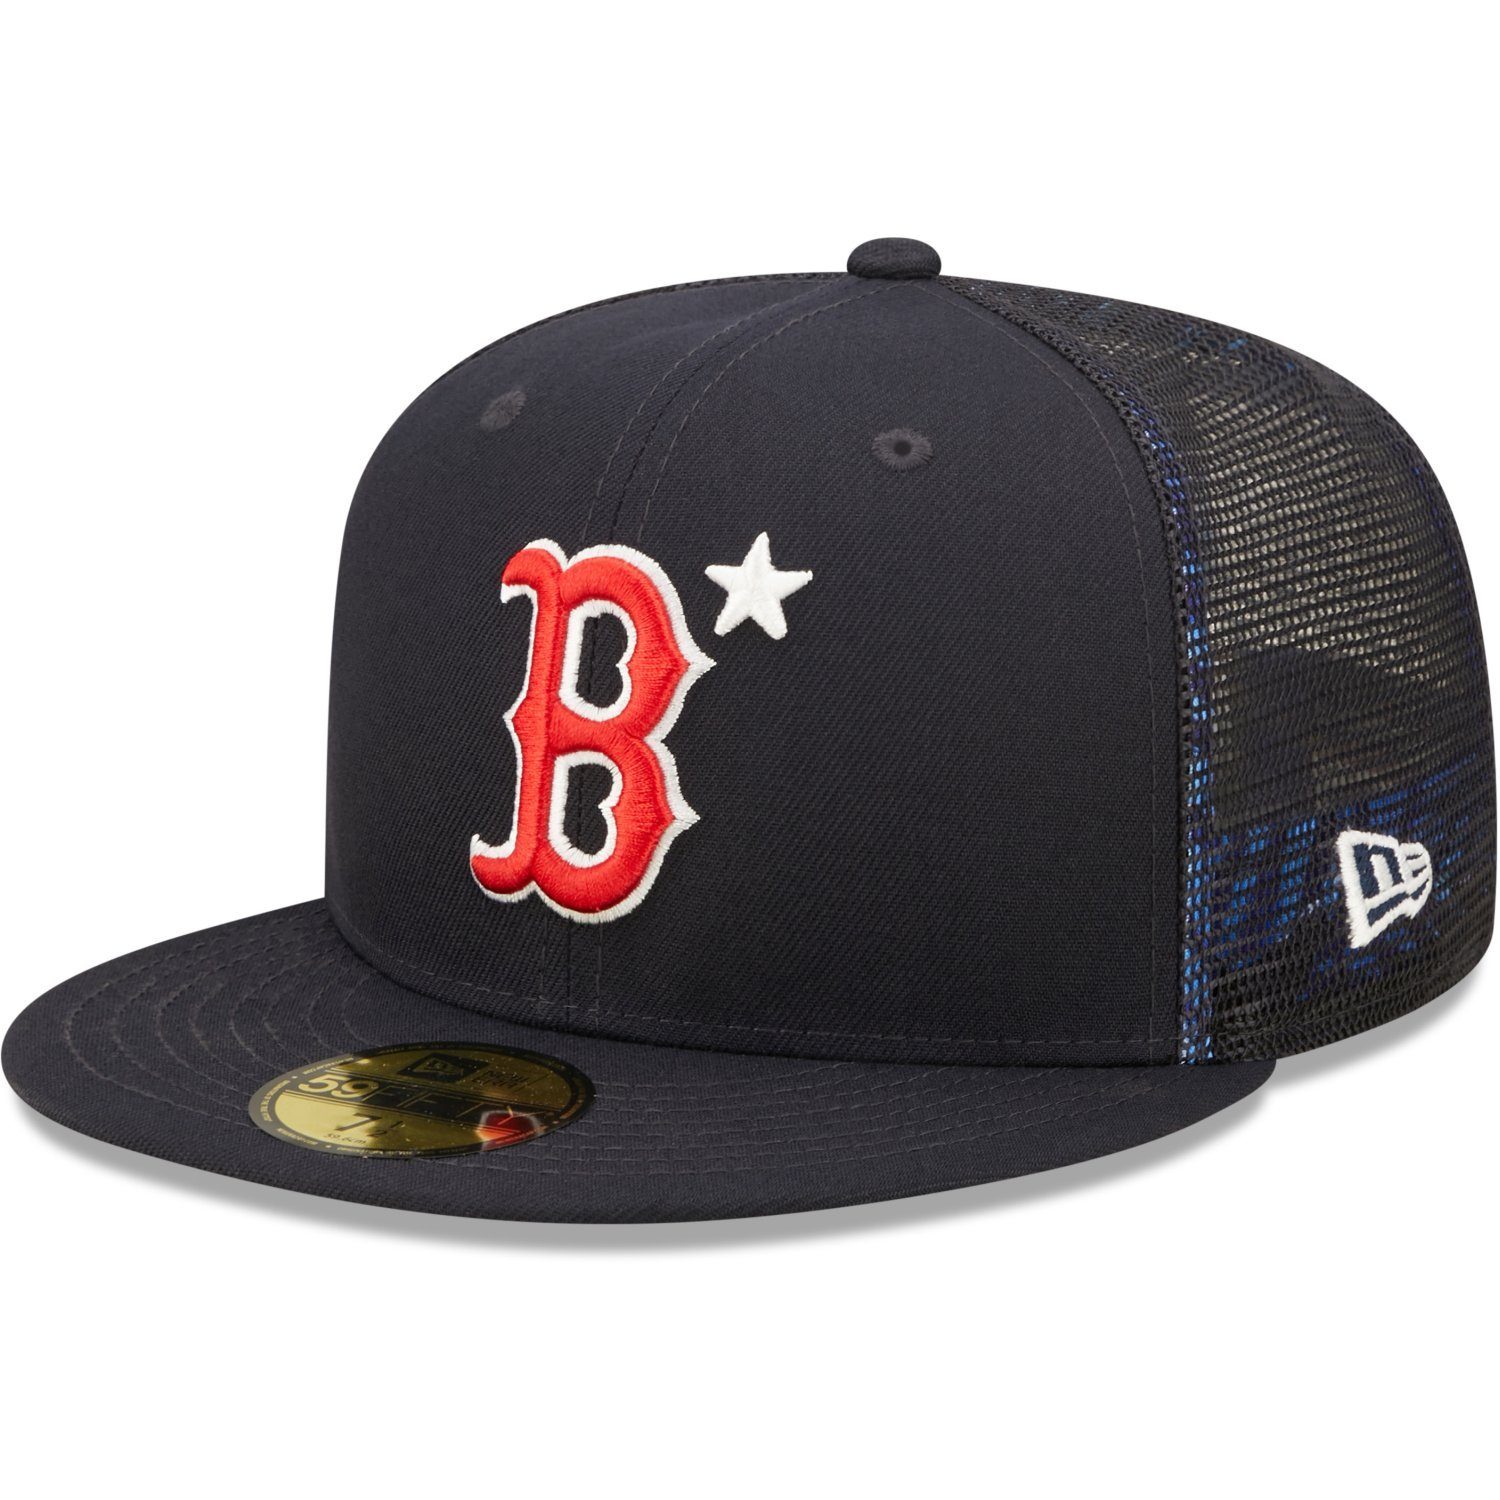 ALLSTAR Boston New Sox GAME Fitted Cap Era Red 59Fifty